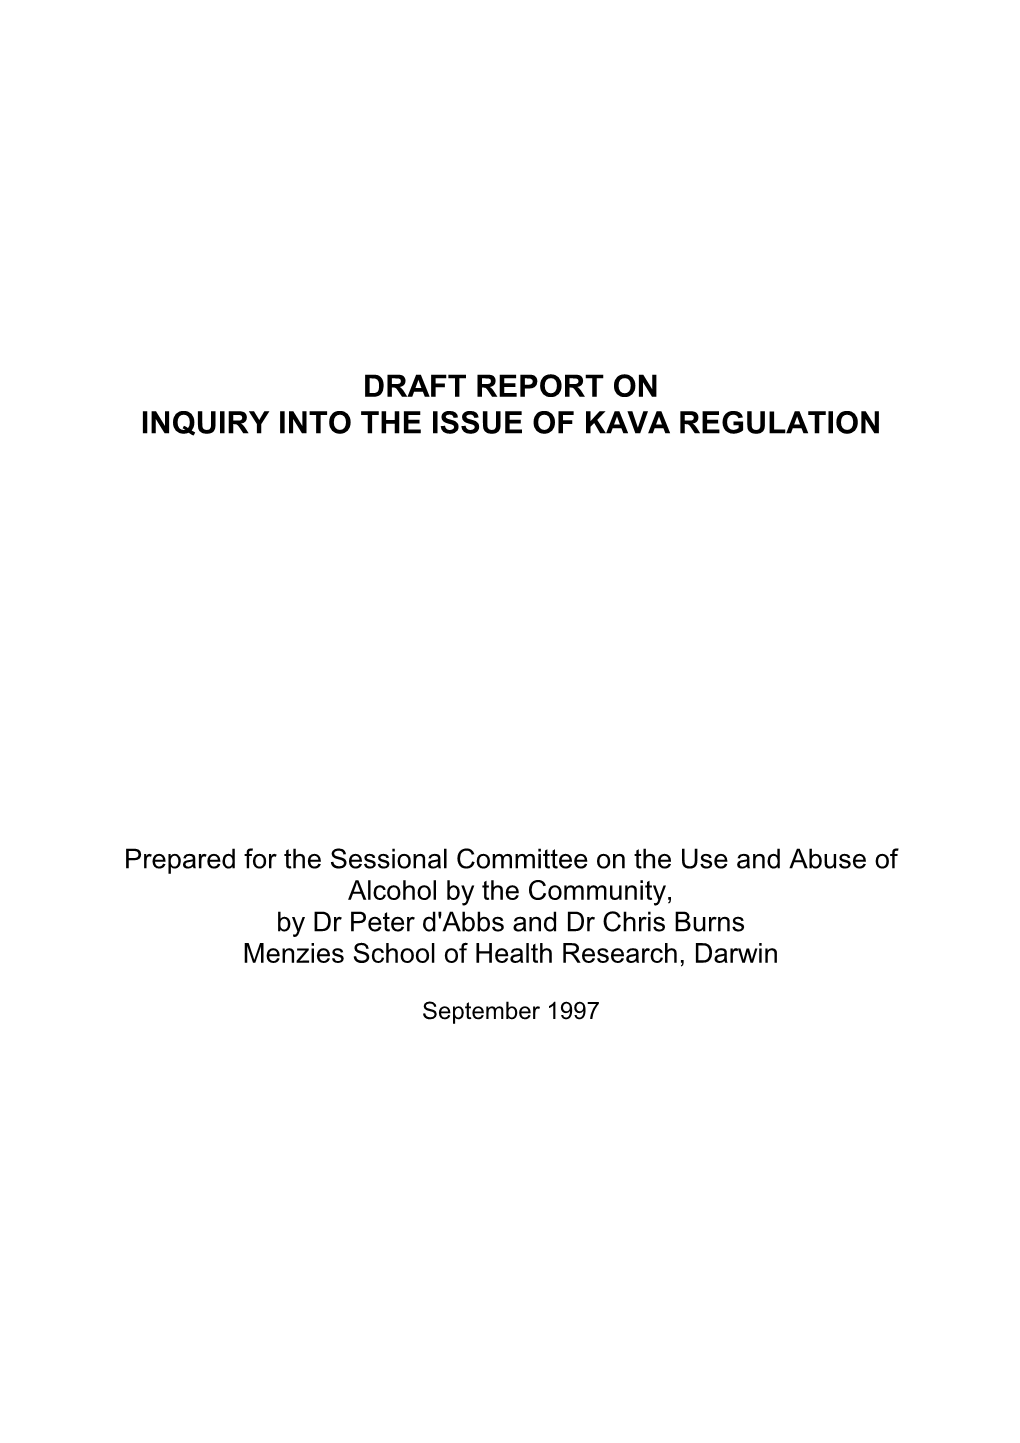 Draft Report on Inquiry Into the Issue of Kava Regulation